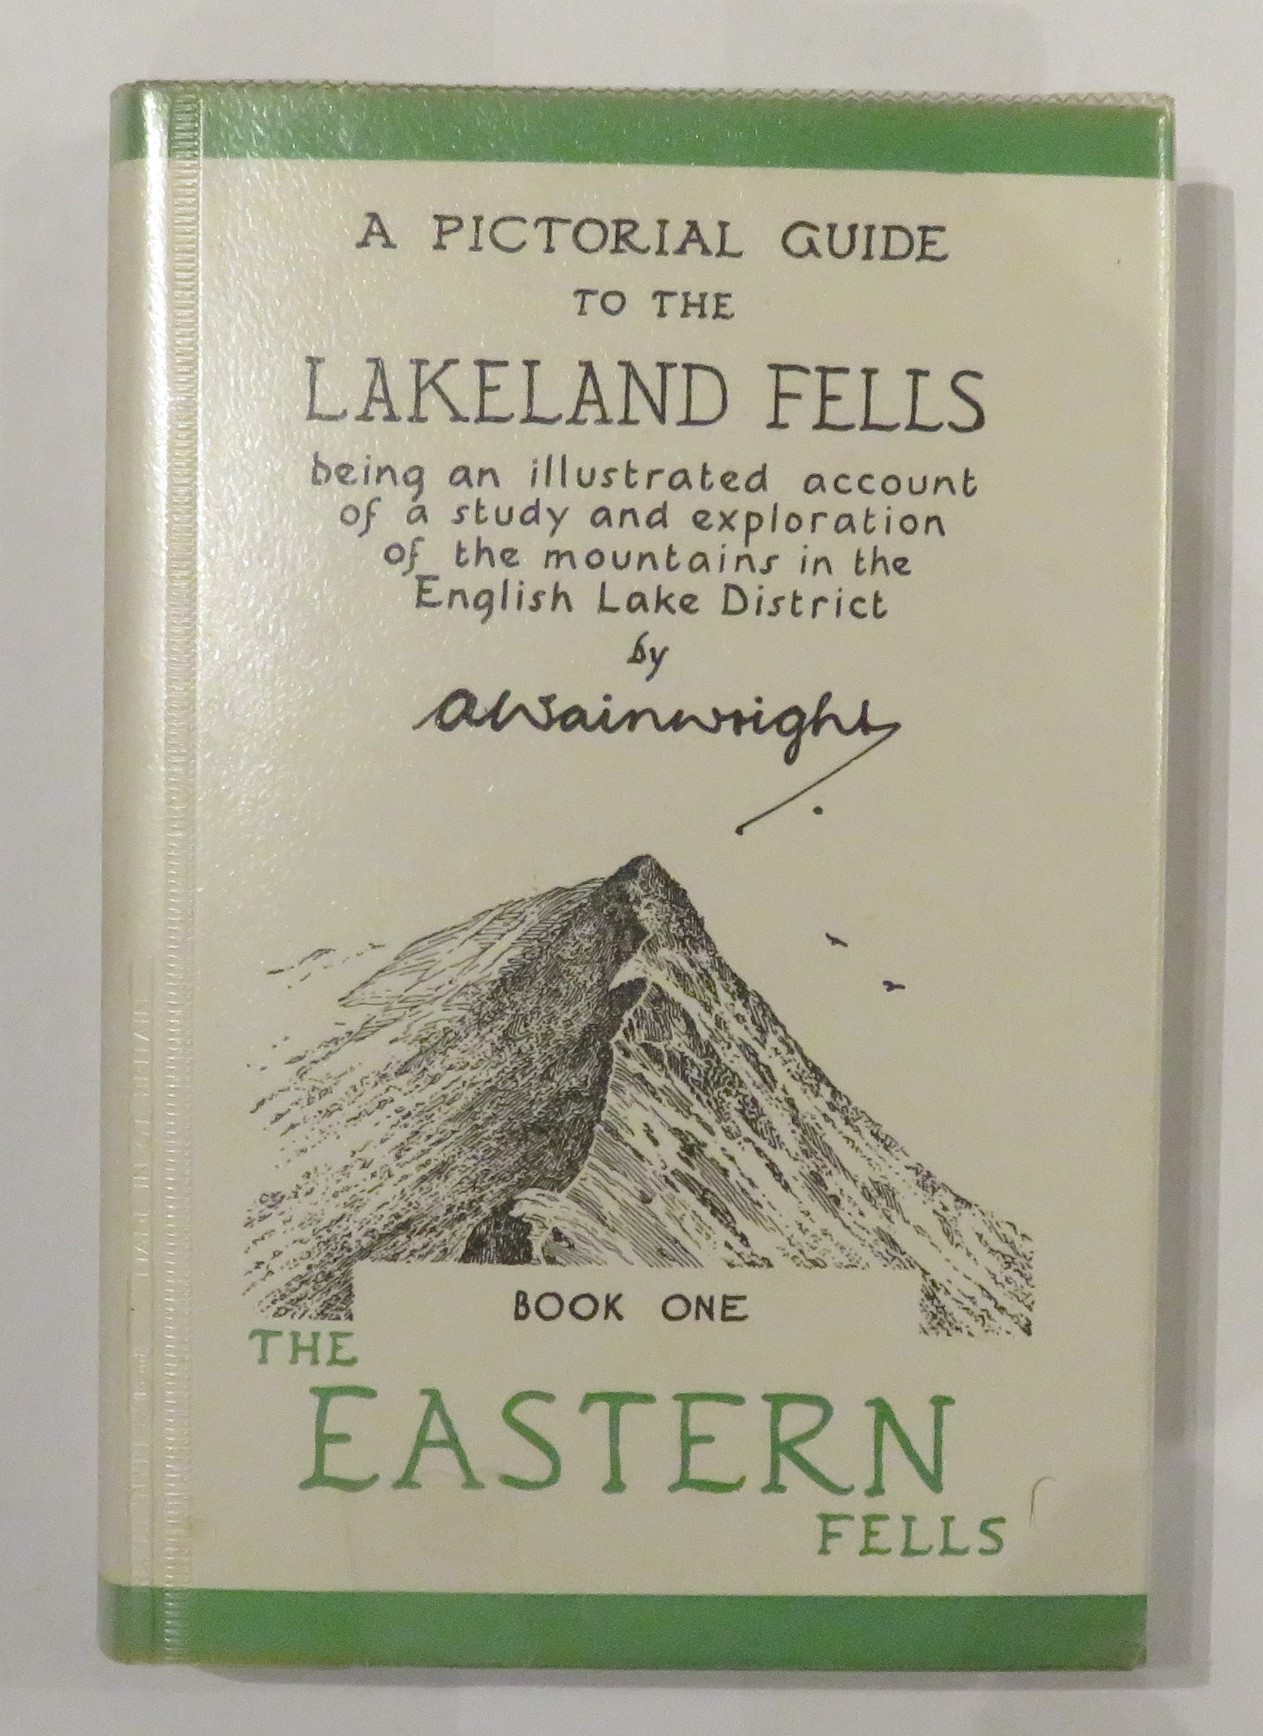 A Pictorial Guide to the Lakeland Fells, Book One: The Eastern Fells